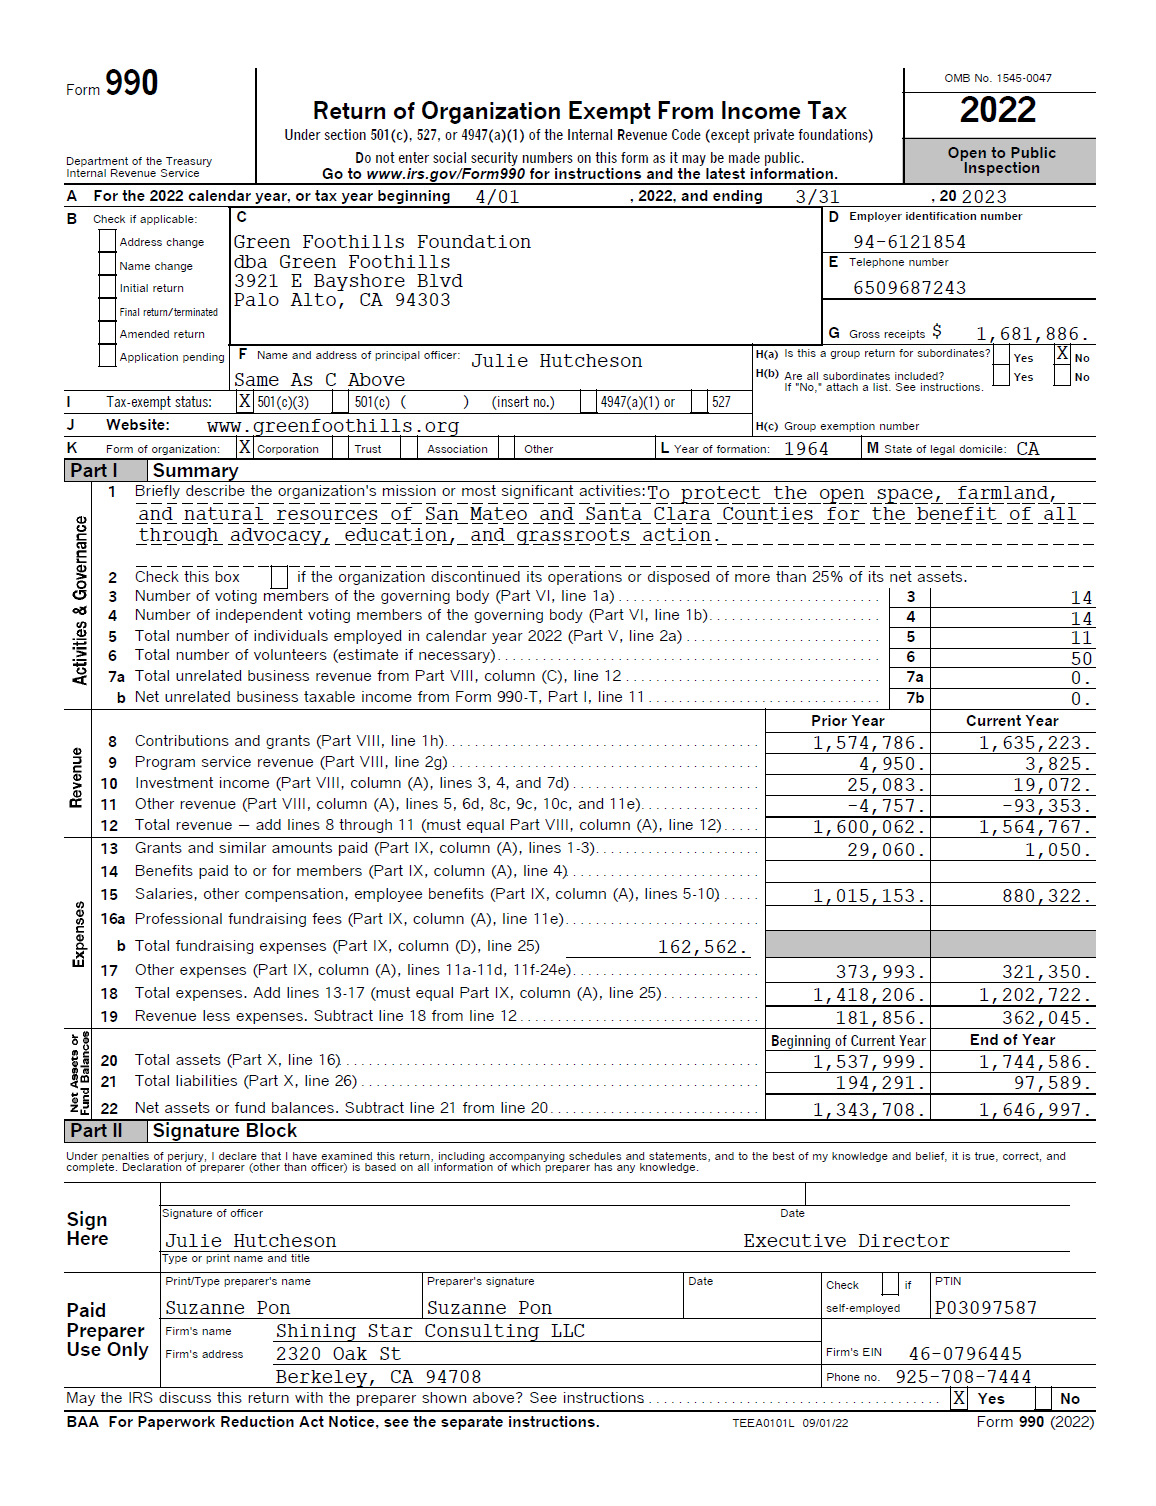 first page of Form 990 for 2022-23